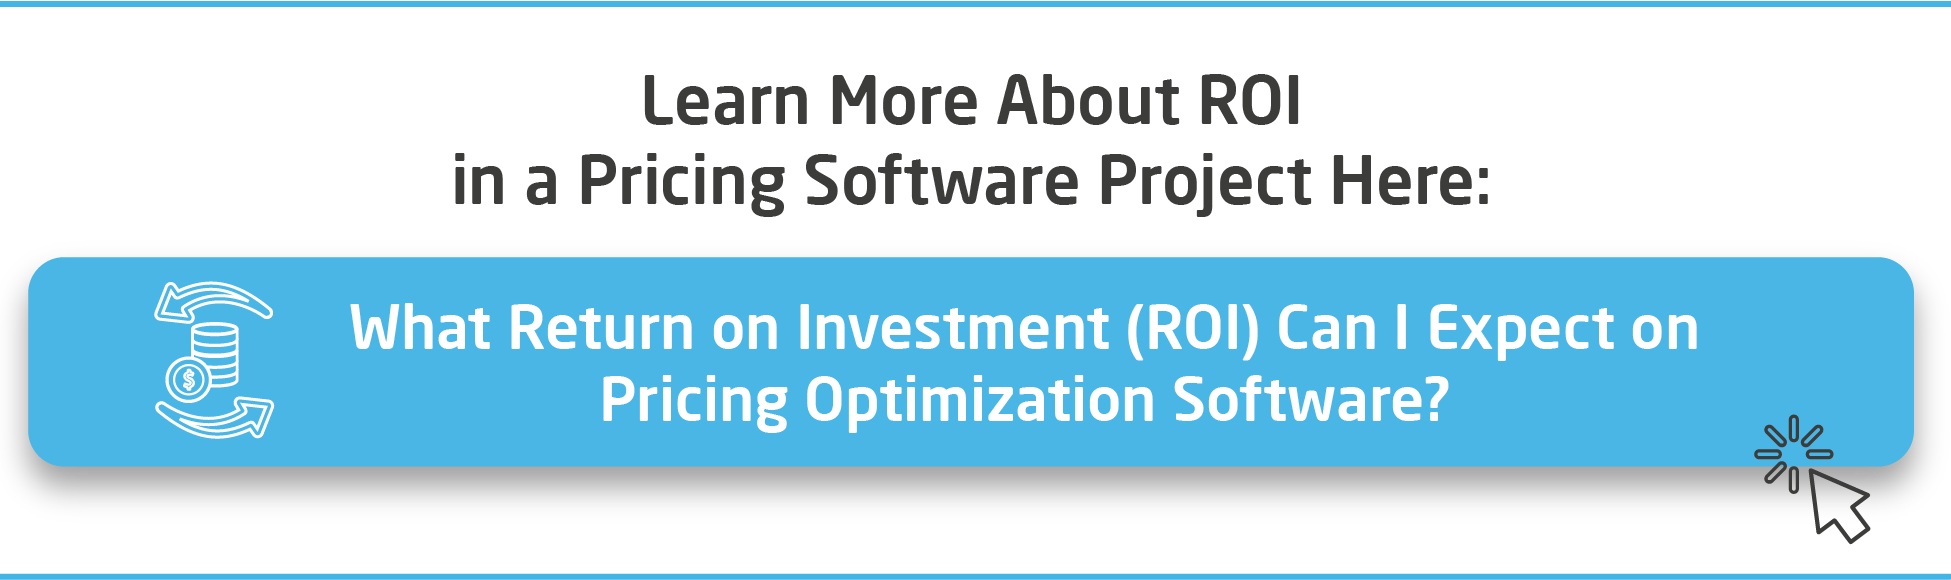 CTA-What-return-on-investment-can-i-expect-on-pricing-optimization-software